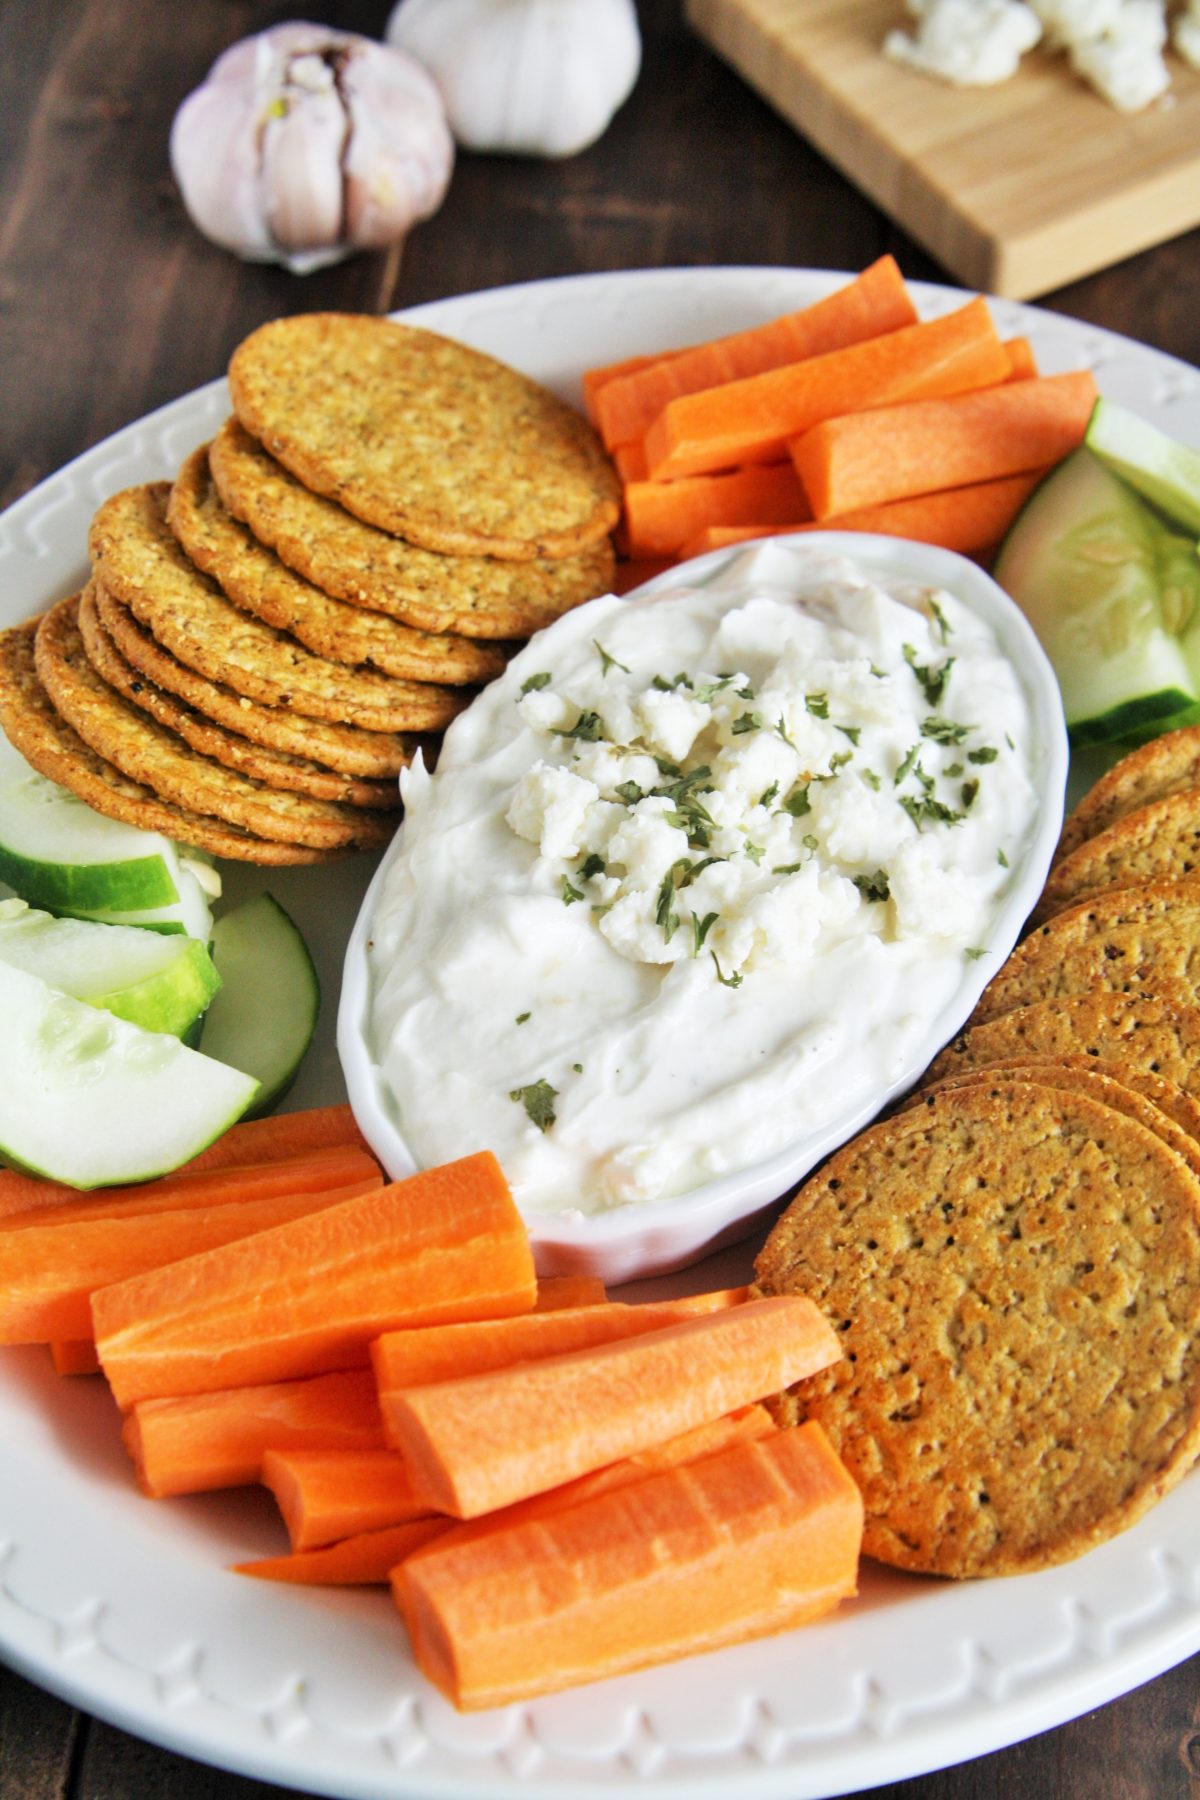 This creamy feta cheese dip with roasted garlic is easy to whip up and requires only 5 ingredients!